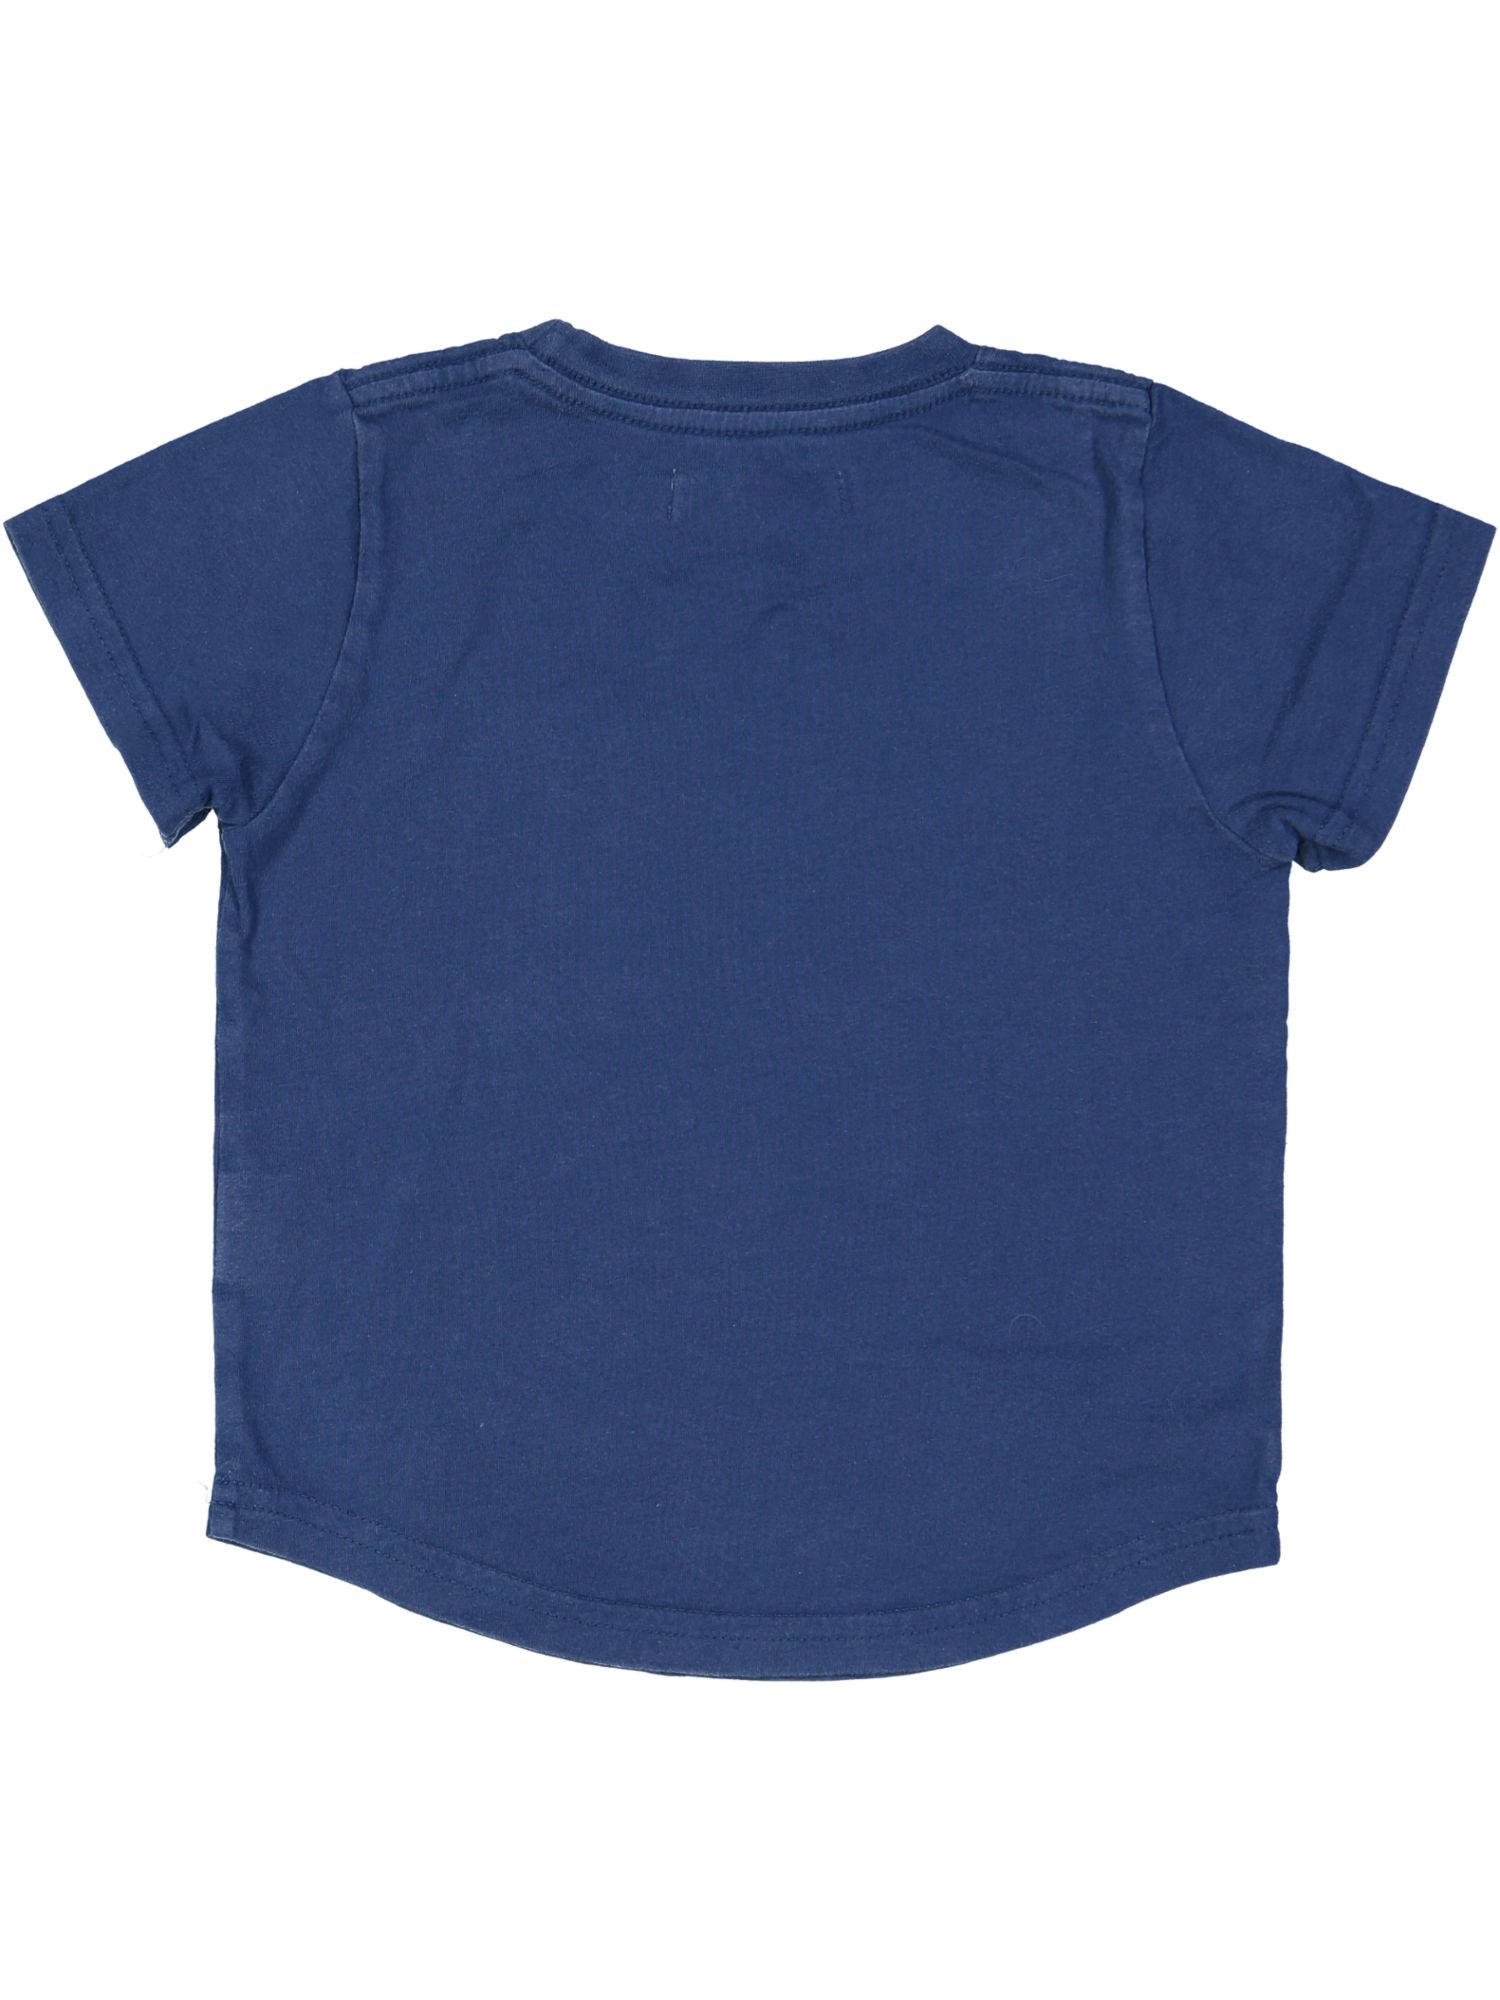 t-shirt blauw the one and only 03j .